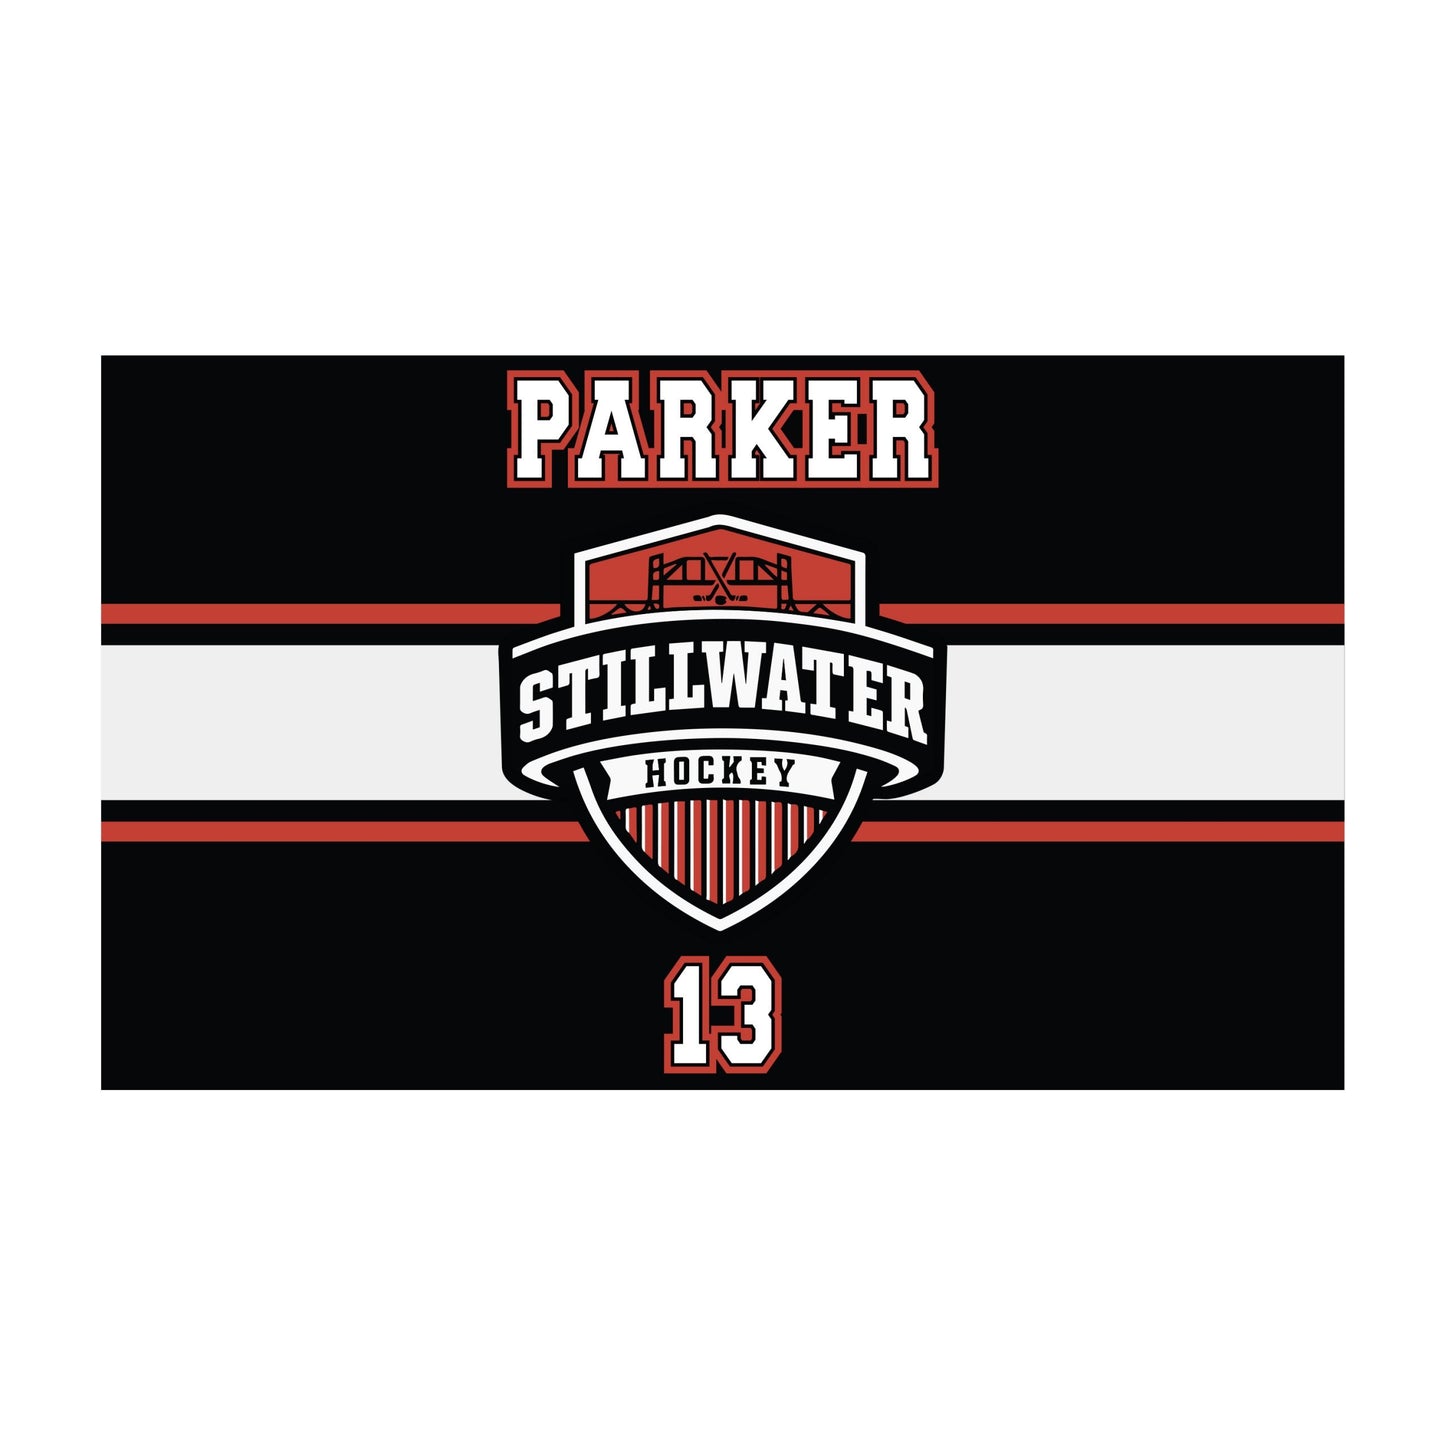 Personalized with Parker number 13 and Stillwater Hockey logo water bottle label. Black with white and red stripes design with team logo, player name and number.